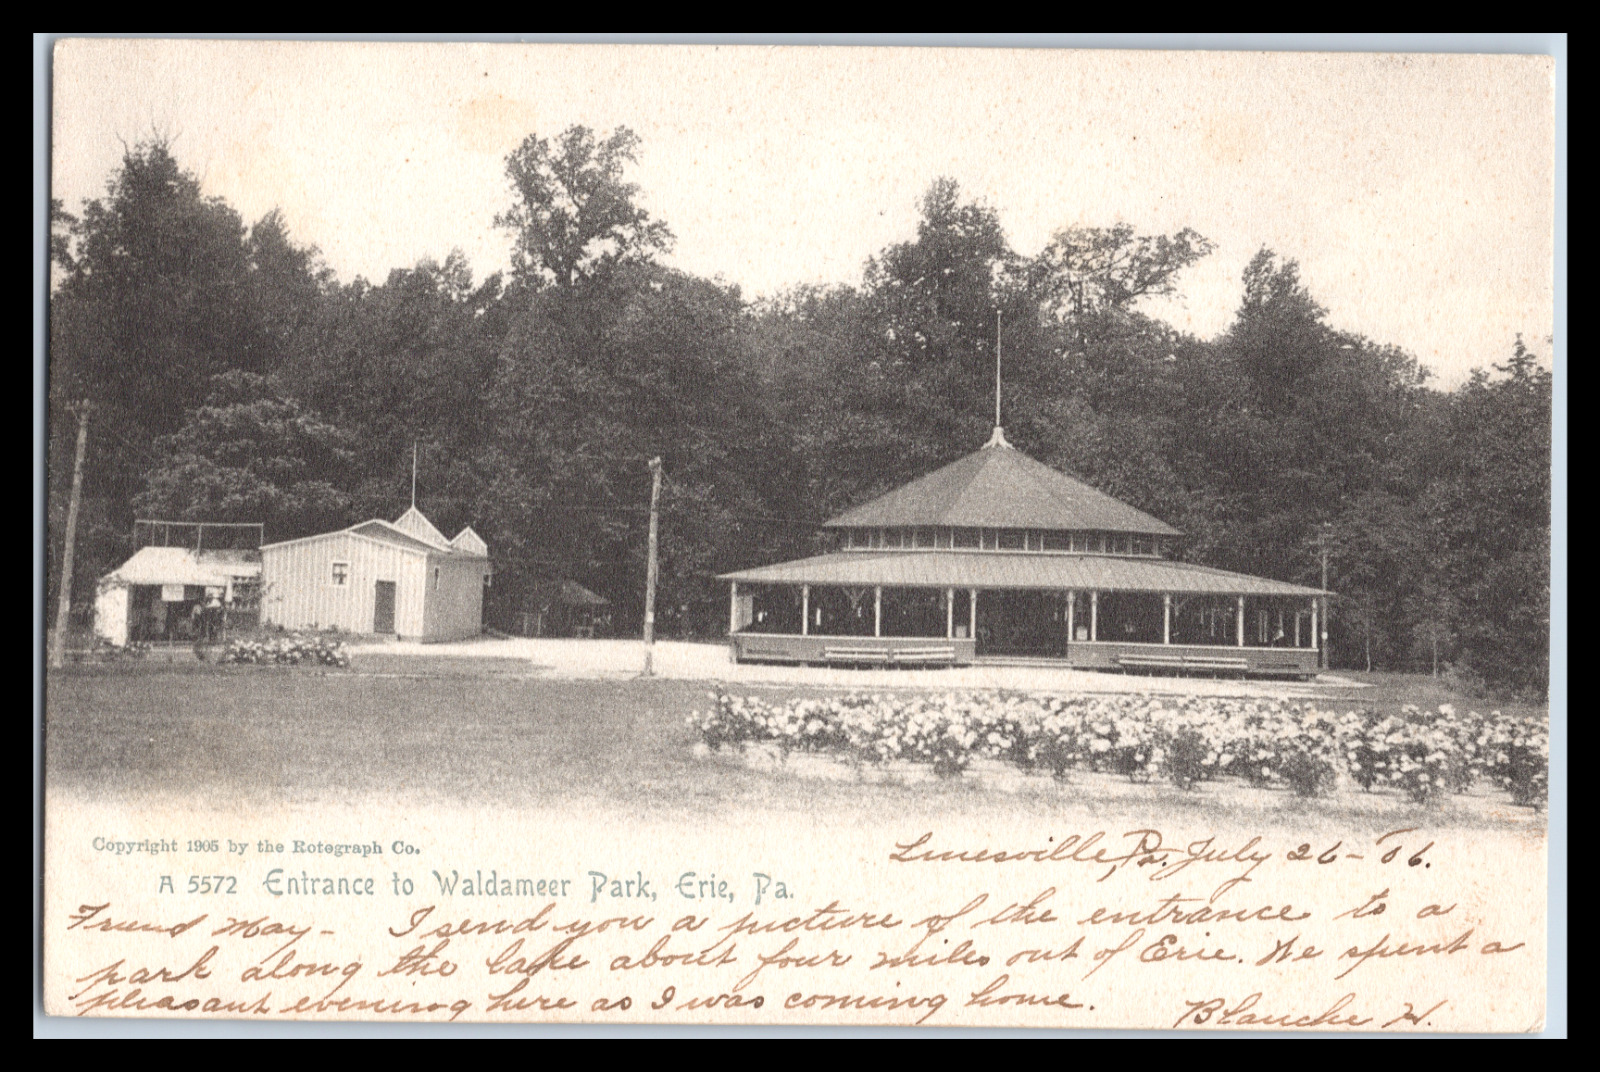 VERY RARE Postcard c1906 Entrance to Waldameer Park, Erie, Pa. ROTOGRAPH CO.